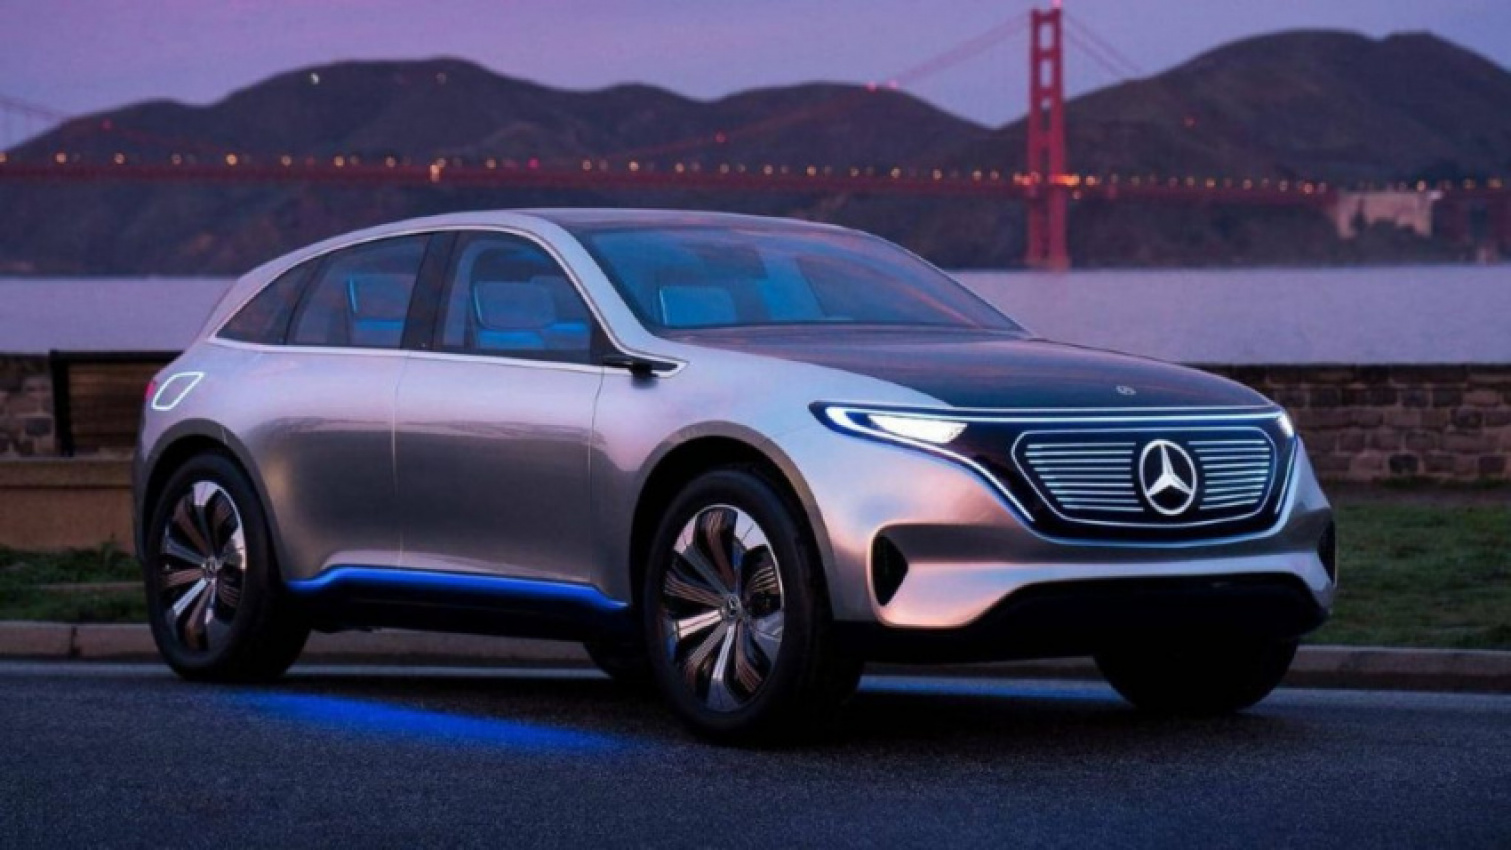 The 2023 MercedesBenz EQS Luxury Electric SUV Is More American Than